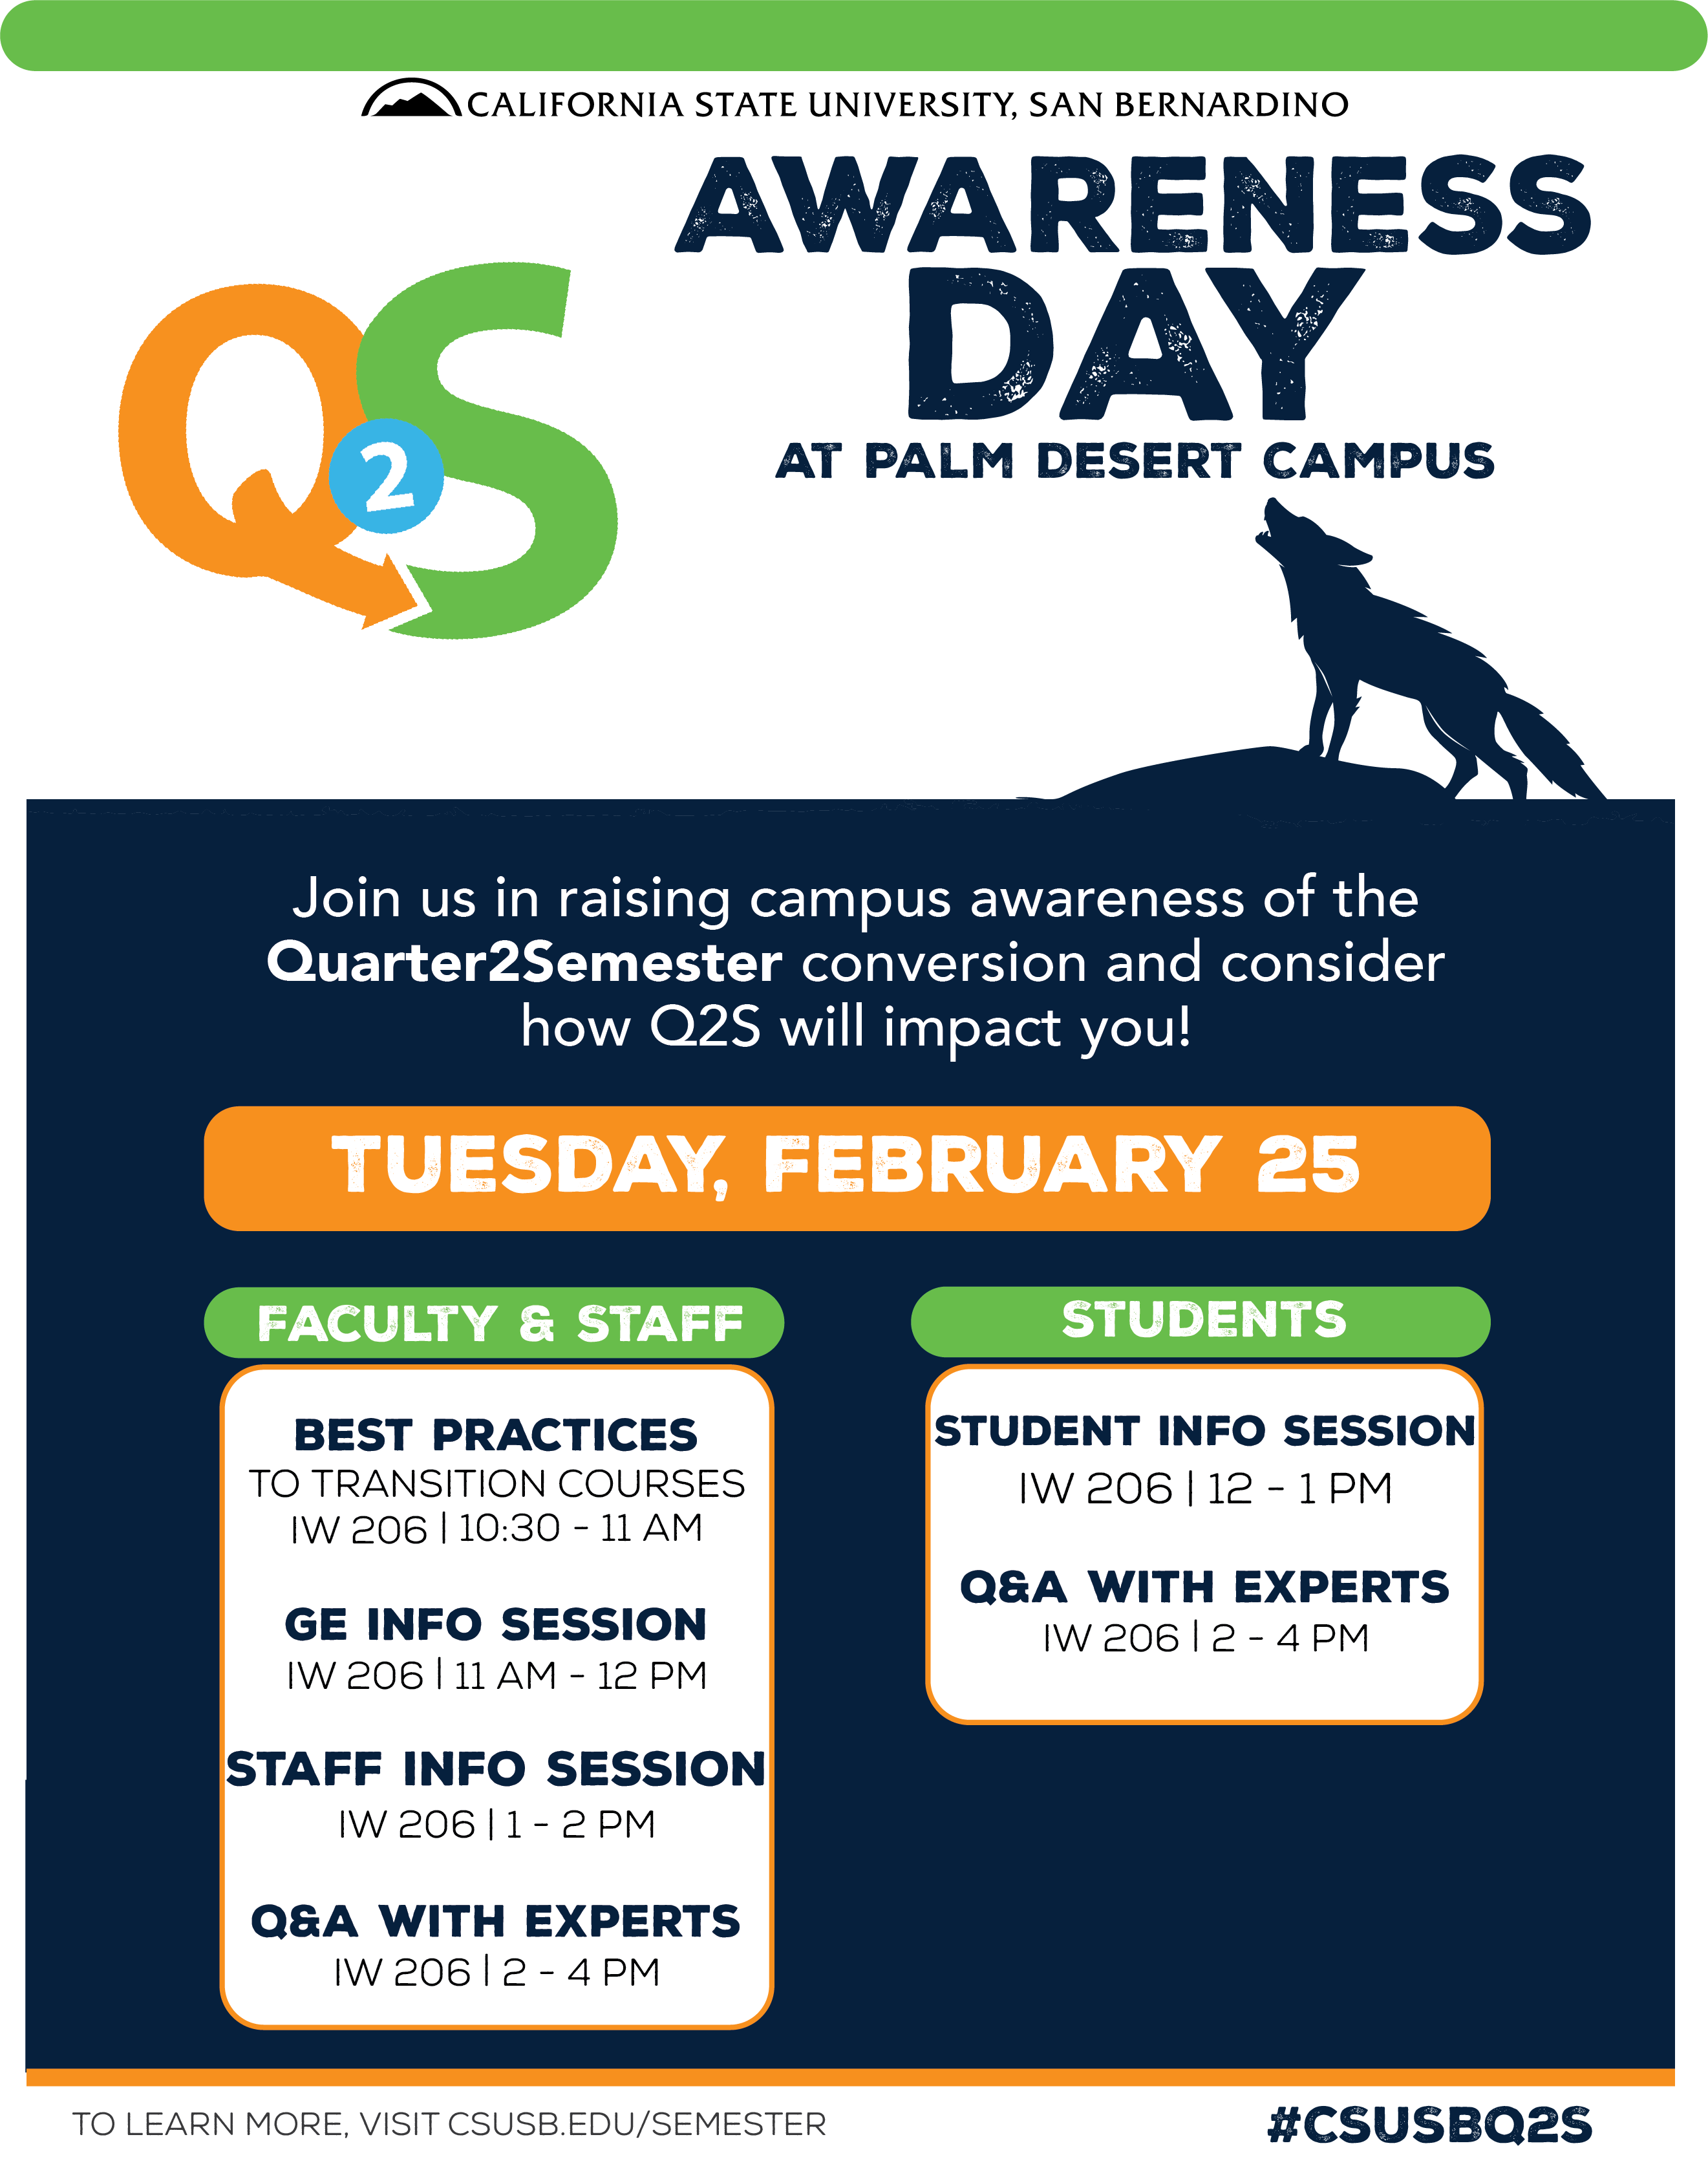 Q2S Awareness Day @ PDC. Best Practices to Transition Courses in IW 206 from 10:30-11am; GE Info Session in IW 206 from 11am-12pm; Staff Info Session in IW 206; Q2S with Experts in IW 206 from 2-4pm